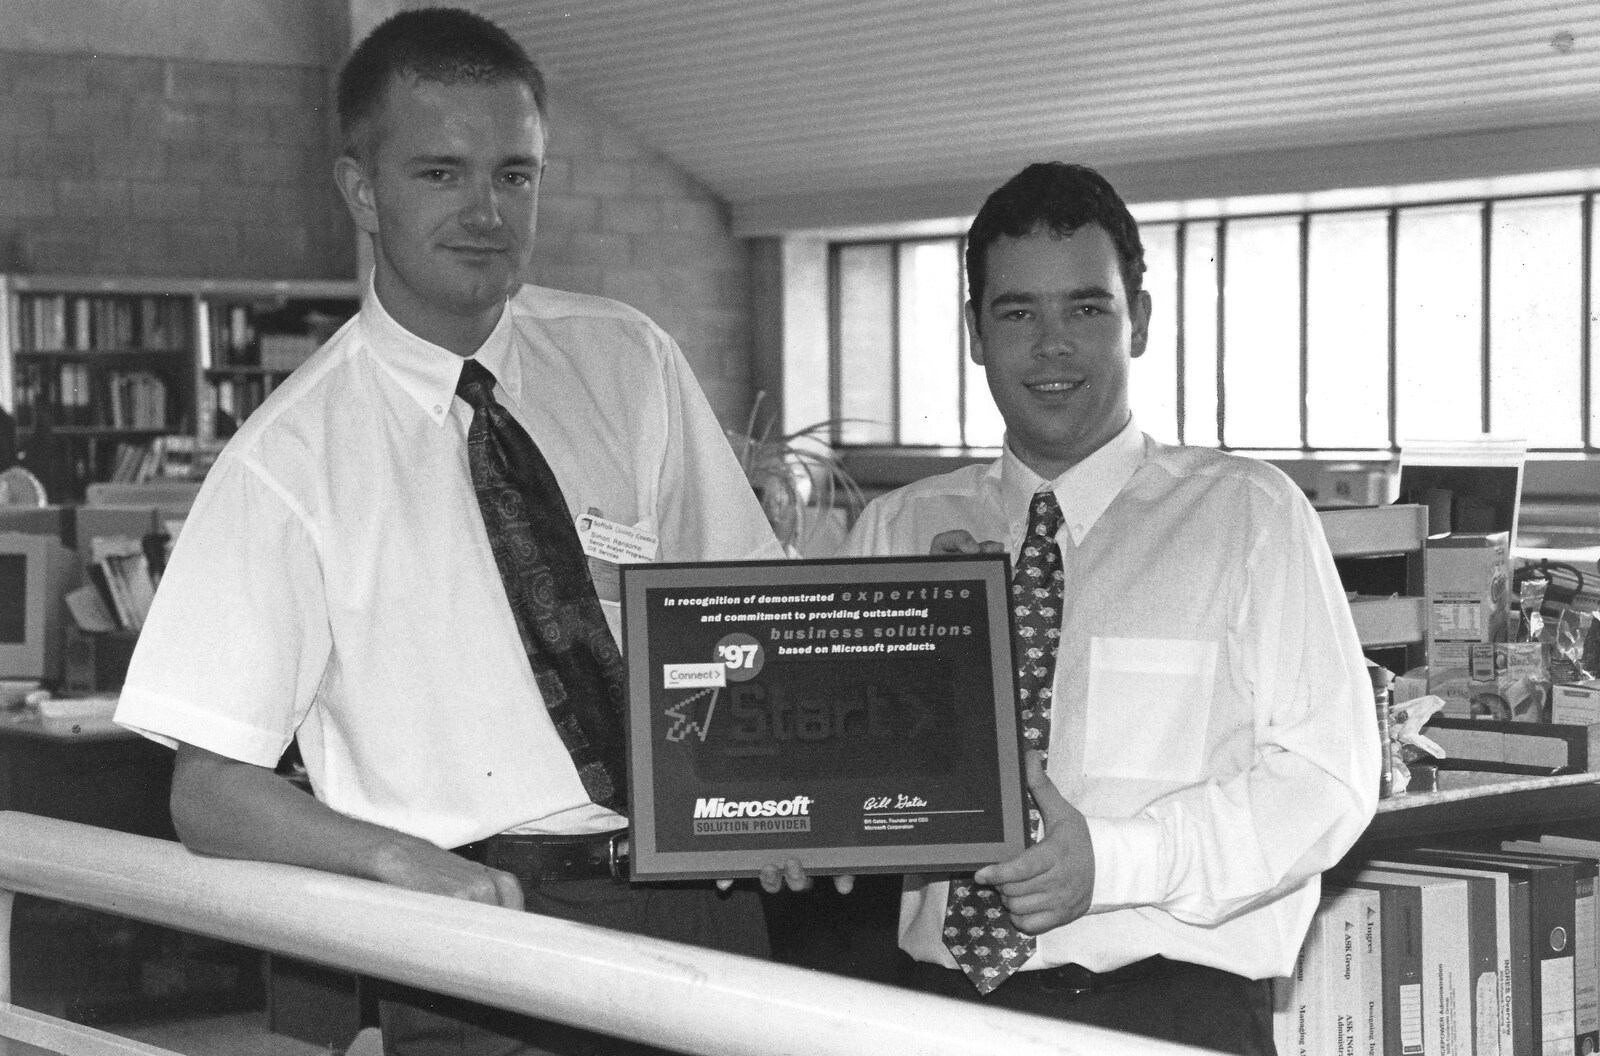 Nosher and Russell become MCPs in 1997 from The CISU Awards Season, Suffolk County Council, Ipswich - 21st May 1998